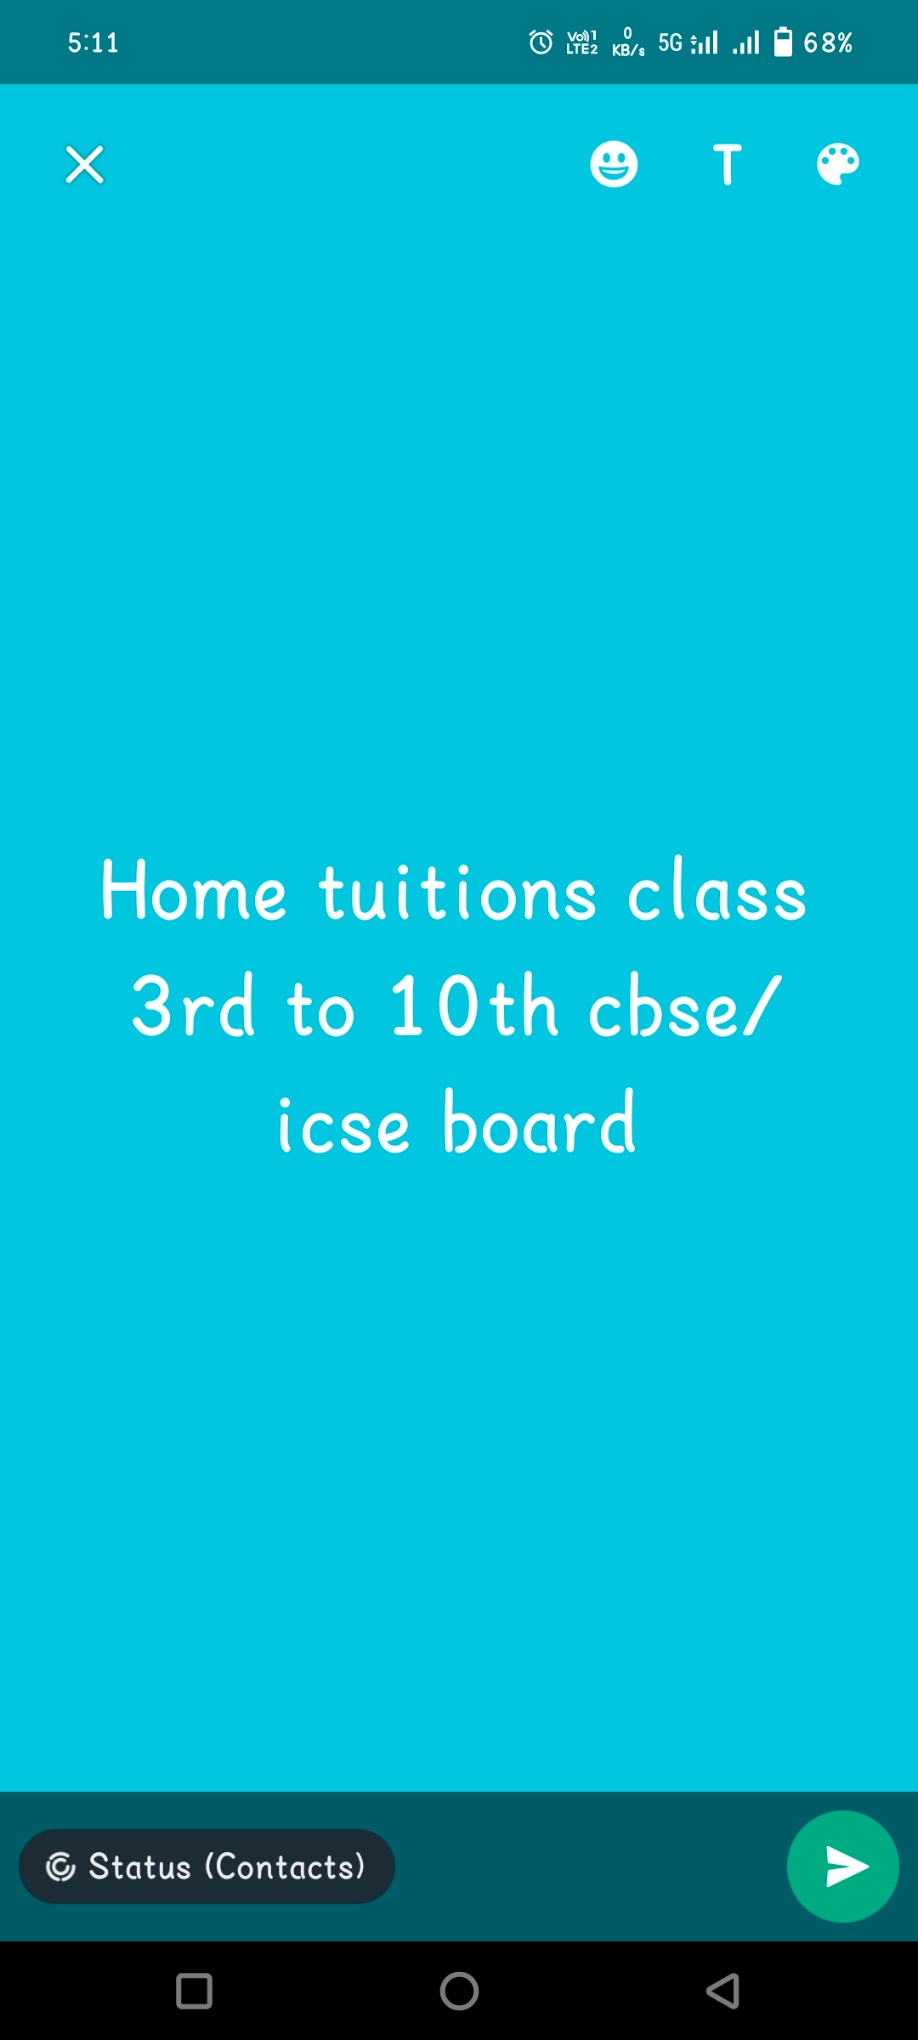 Home tuitions upto class 10th cbse board